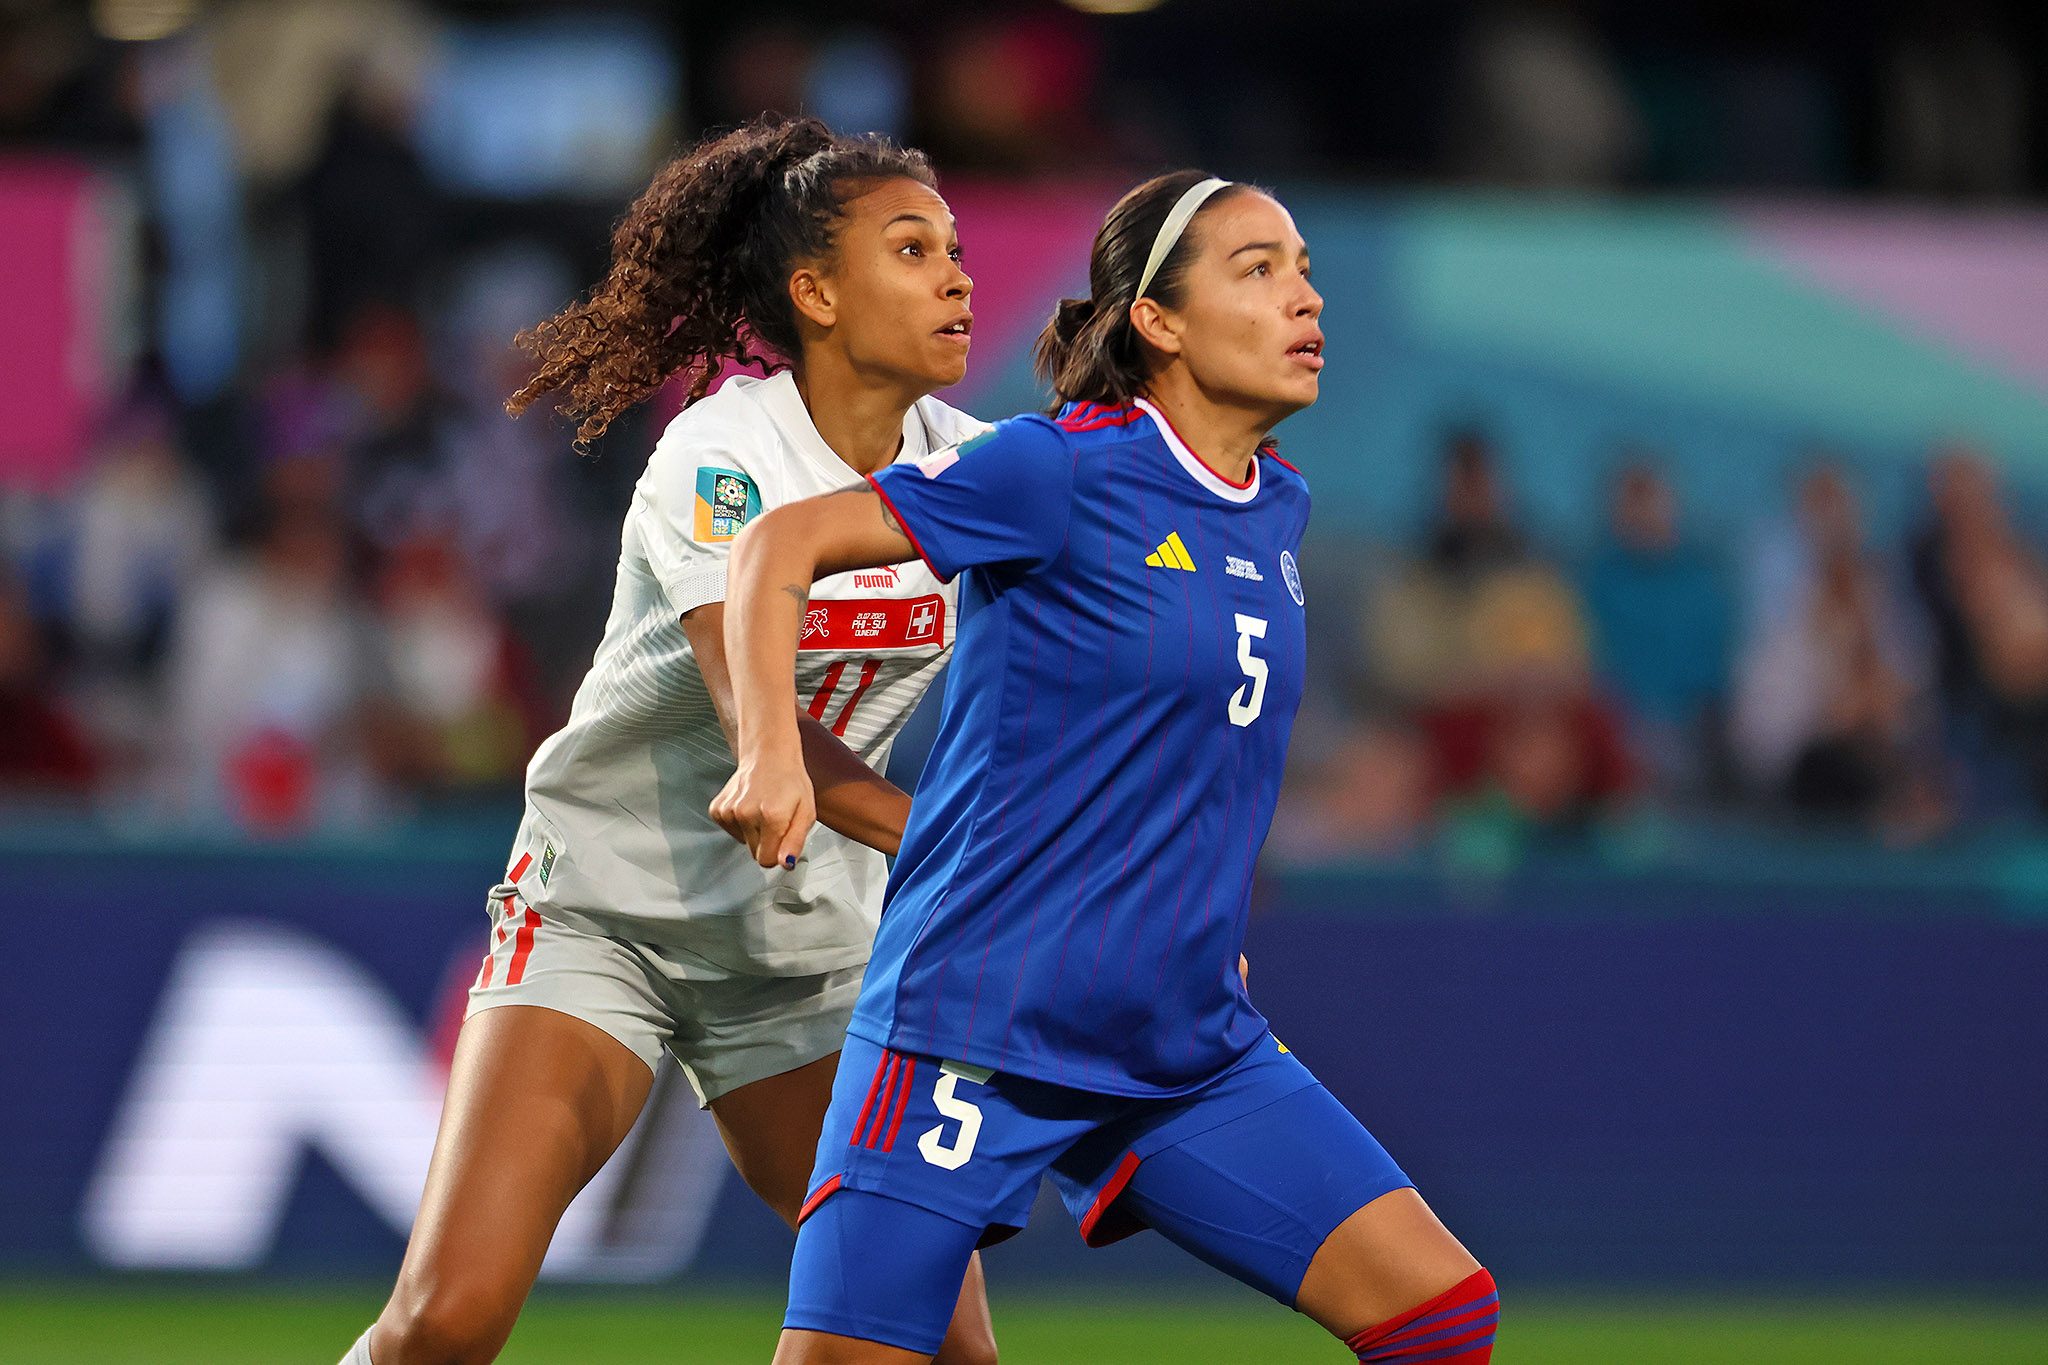 Filipinas fall short to Switzerland in historic World Cup debut